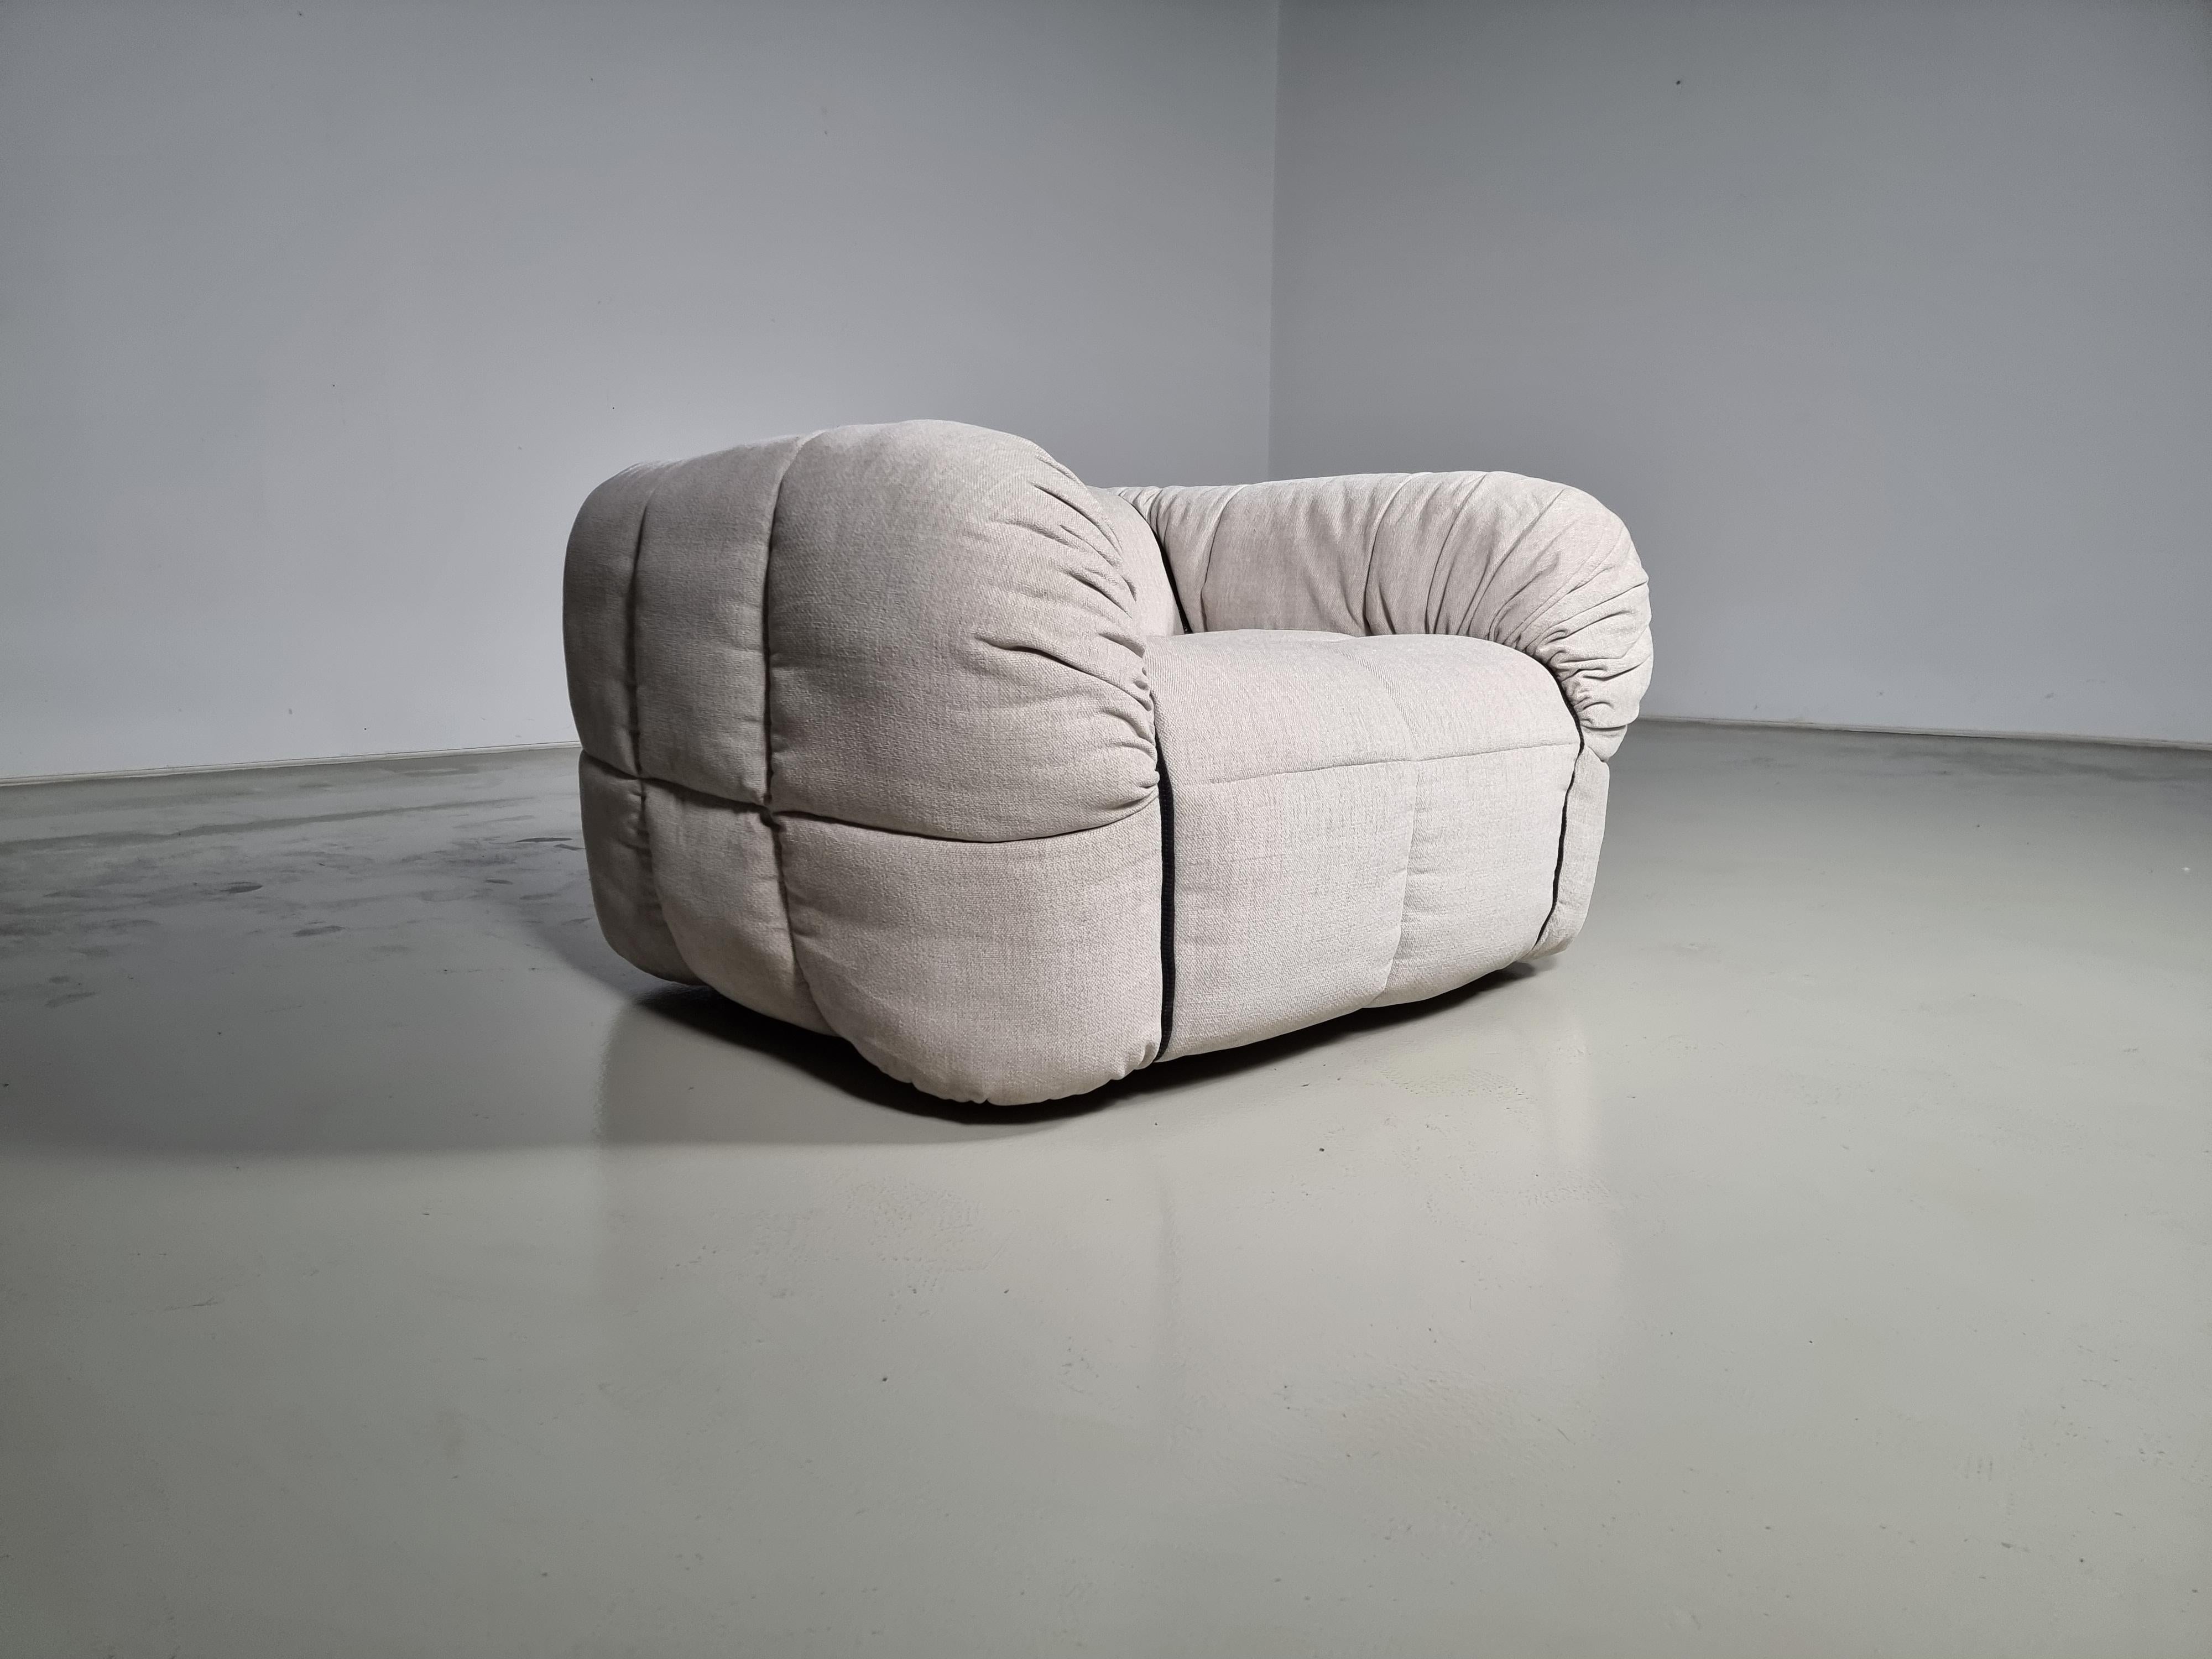 Stunning strips chair by Cini Boeri new upholstered in a creme/grey colour recycled fabric. One of the most famous products of Arflex. Designed in 1968, it was awarded the prize Compasso d’Oro and it is displayed in several museums in the world,